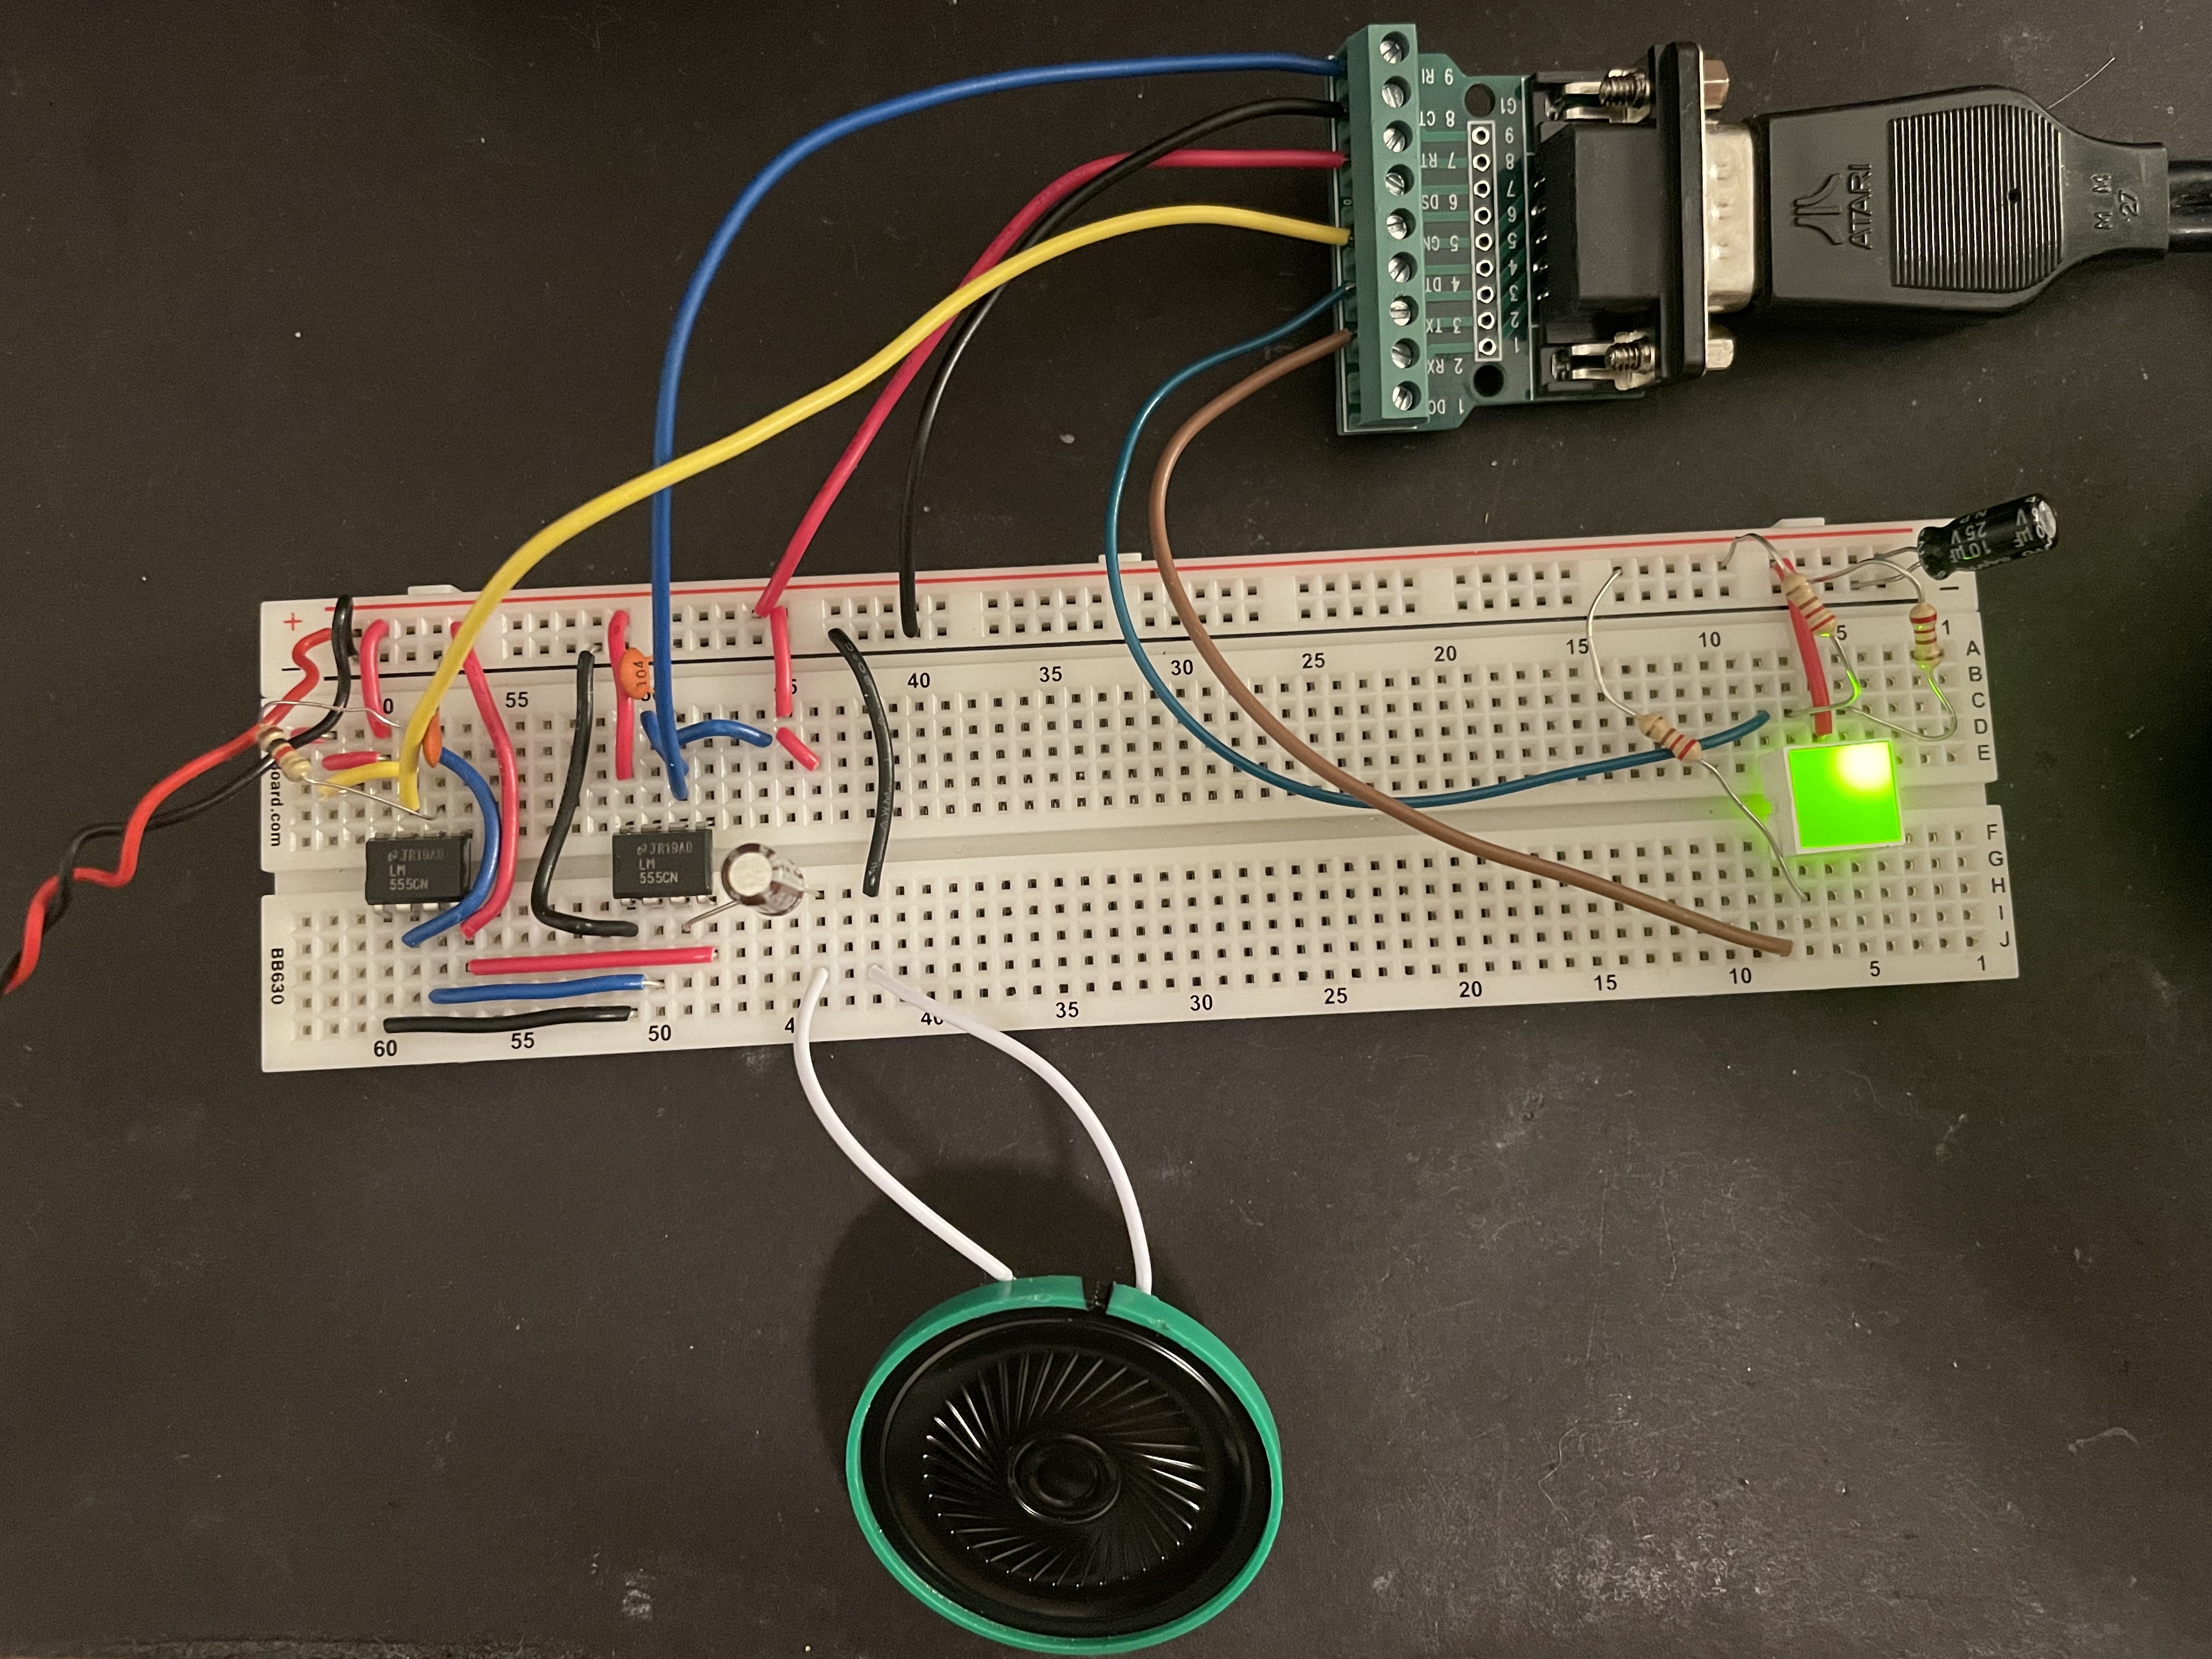 A breadboard with 2 555s, a DE-9 breakout board, and some passive components